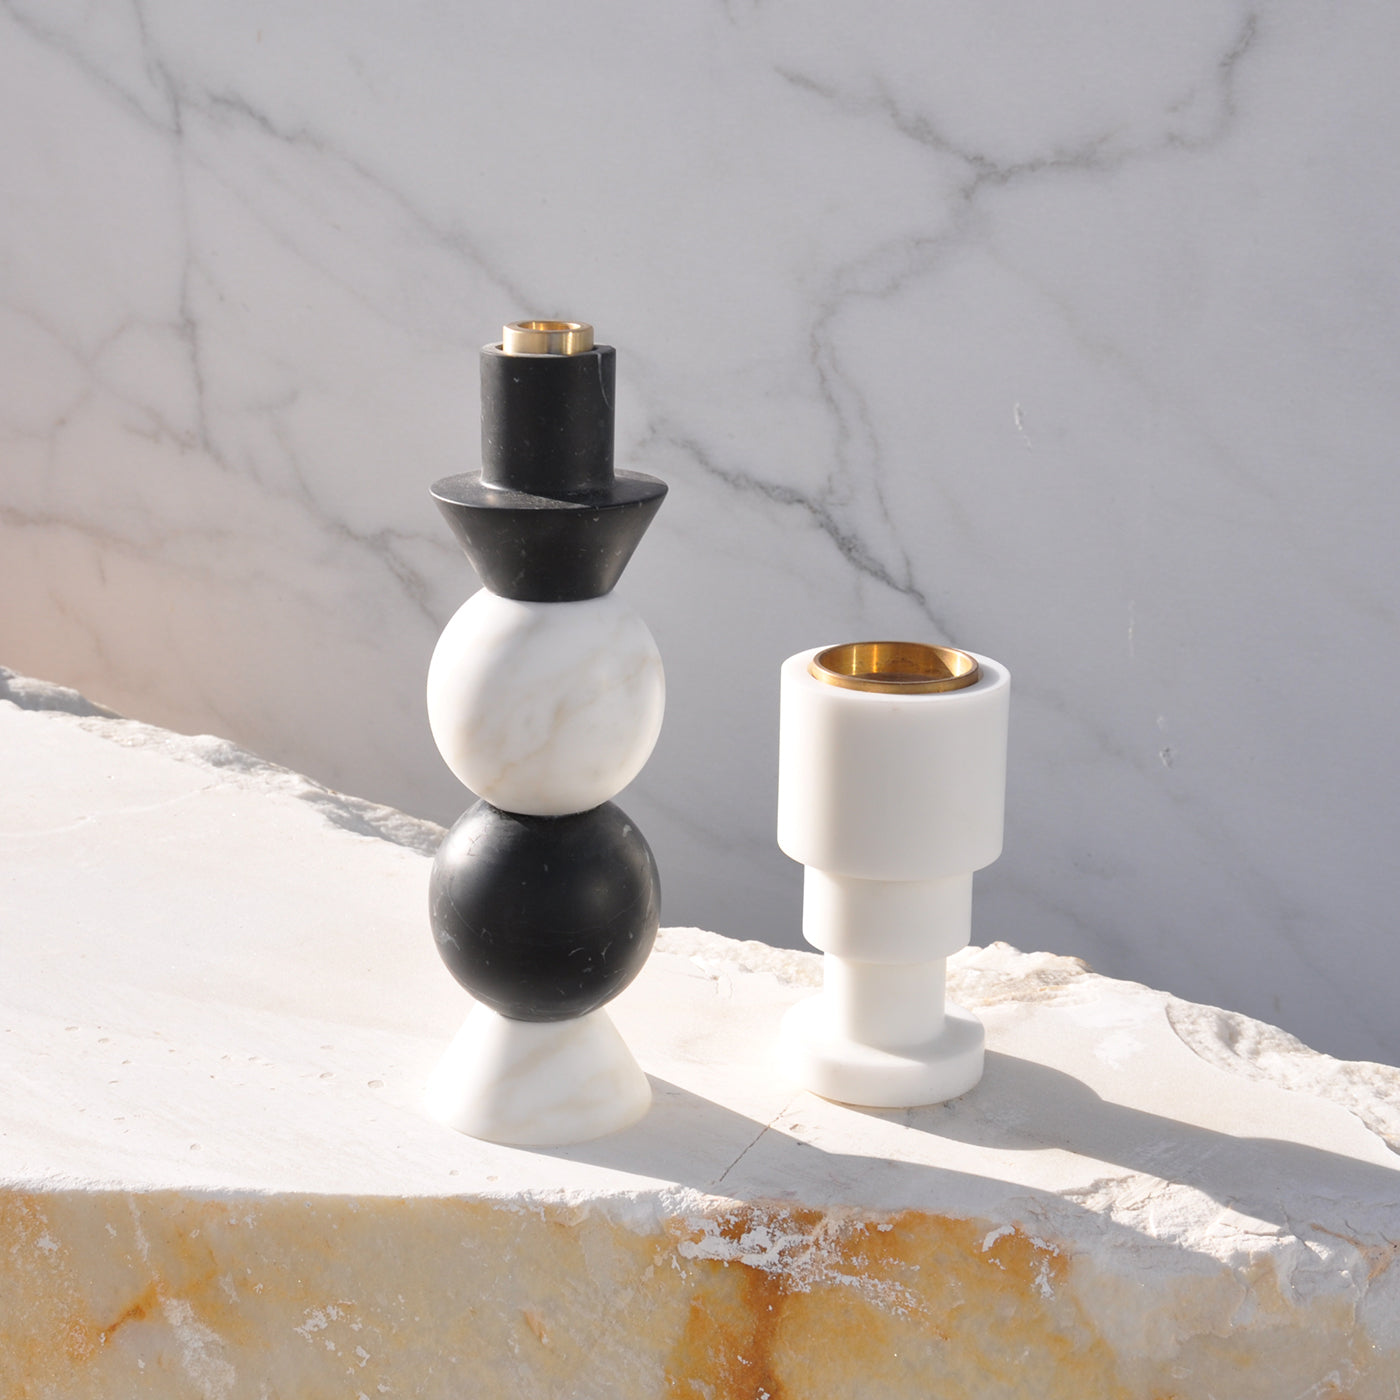 Carrara Marble and Brass Candleholder by Jacopo Simonetti - Alternative view 4